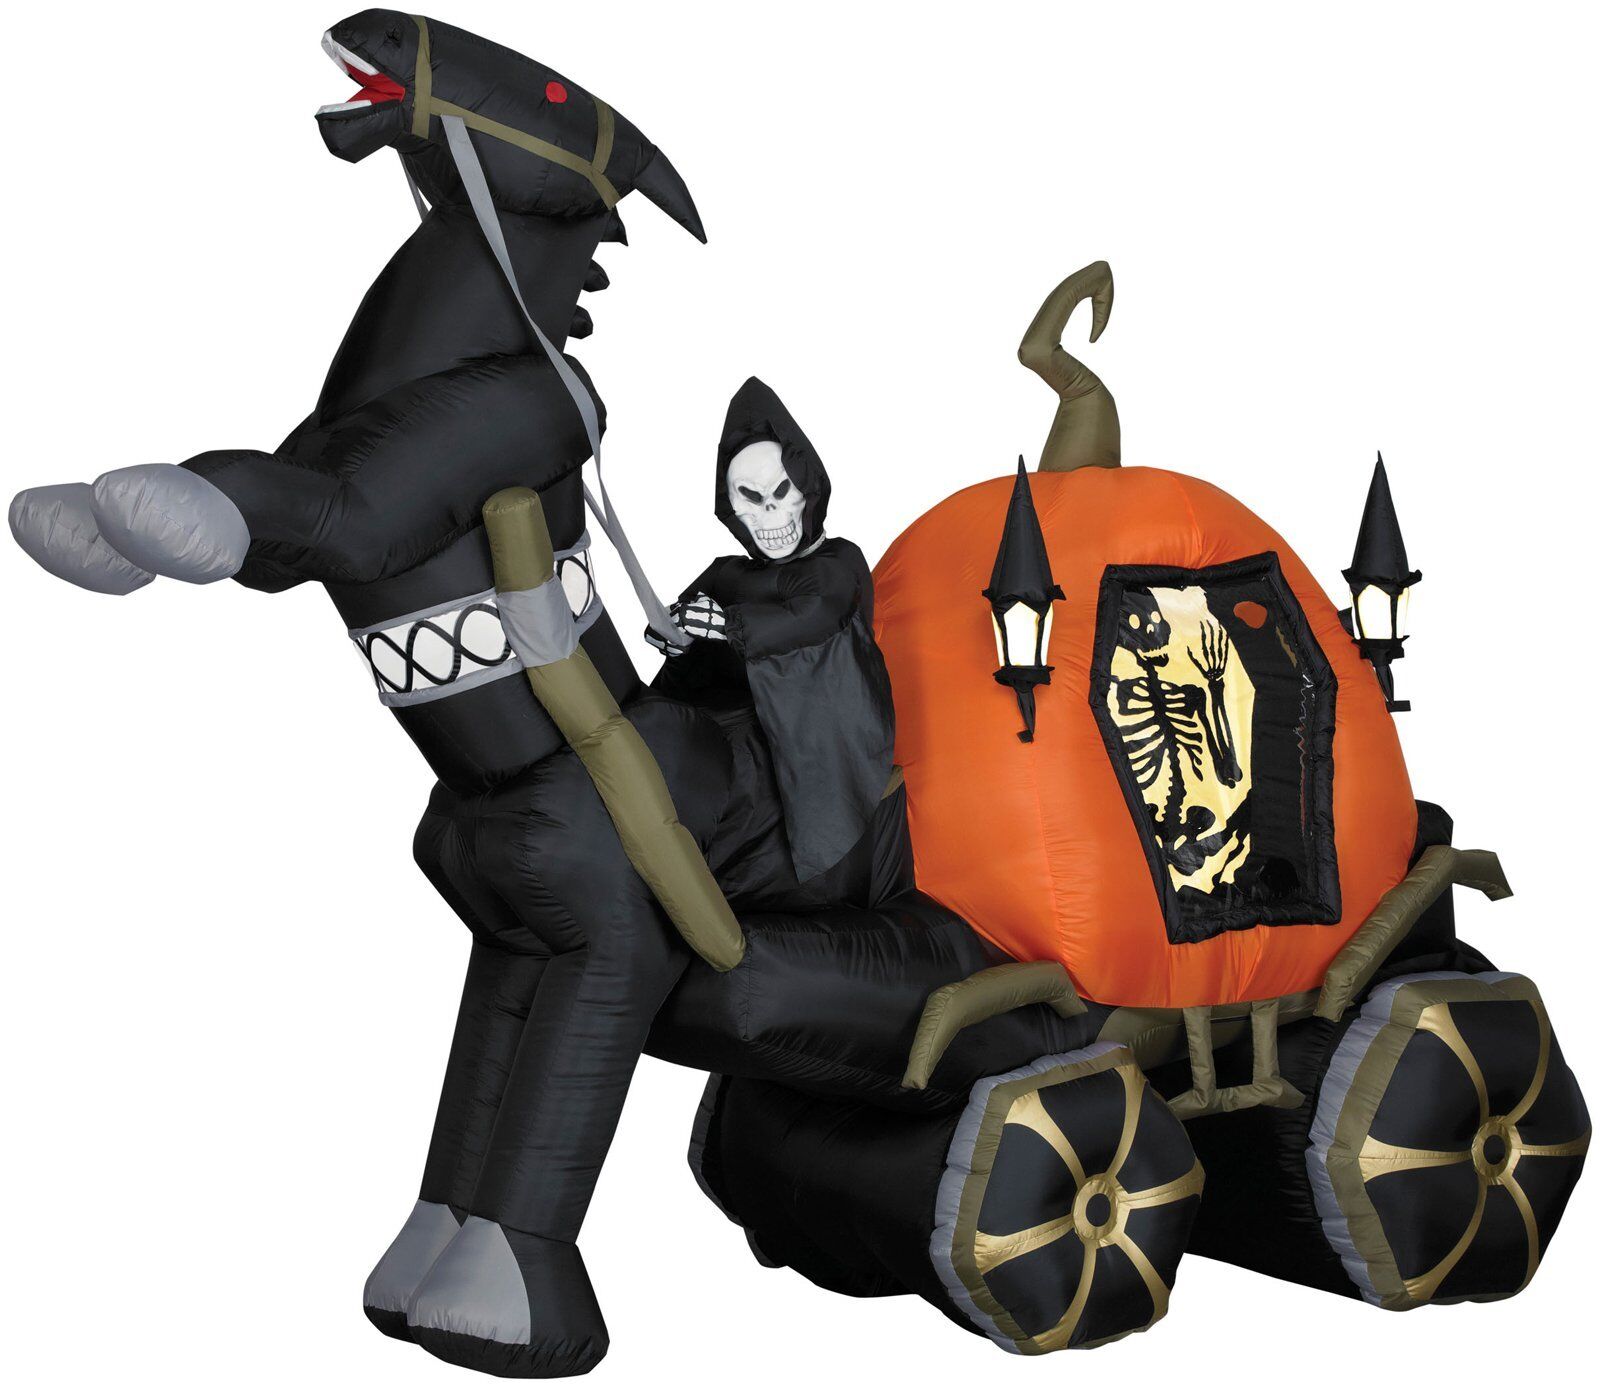 HALLOWEEN ANIMATED GRIM REAPER PUMPKIN CARRIAGE SOUND  INFLATABLE AIRBLOWN